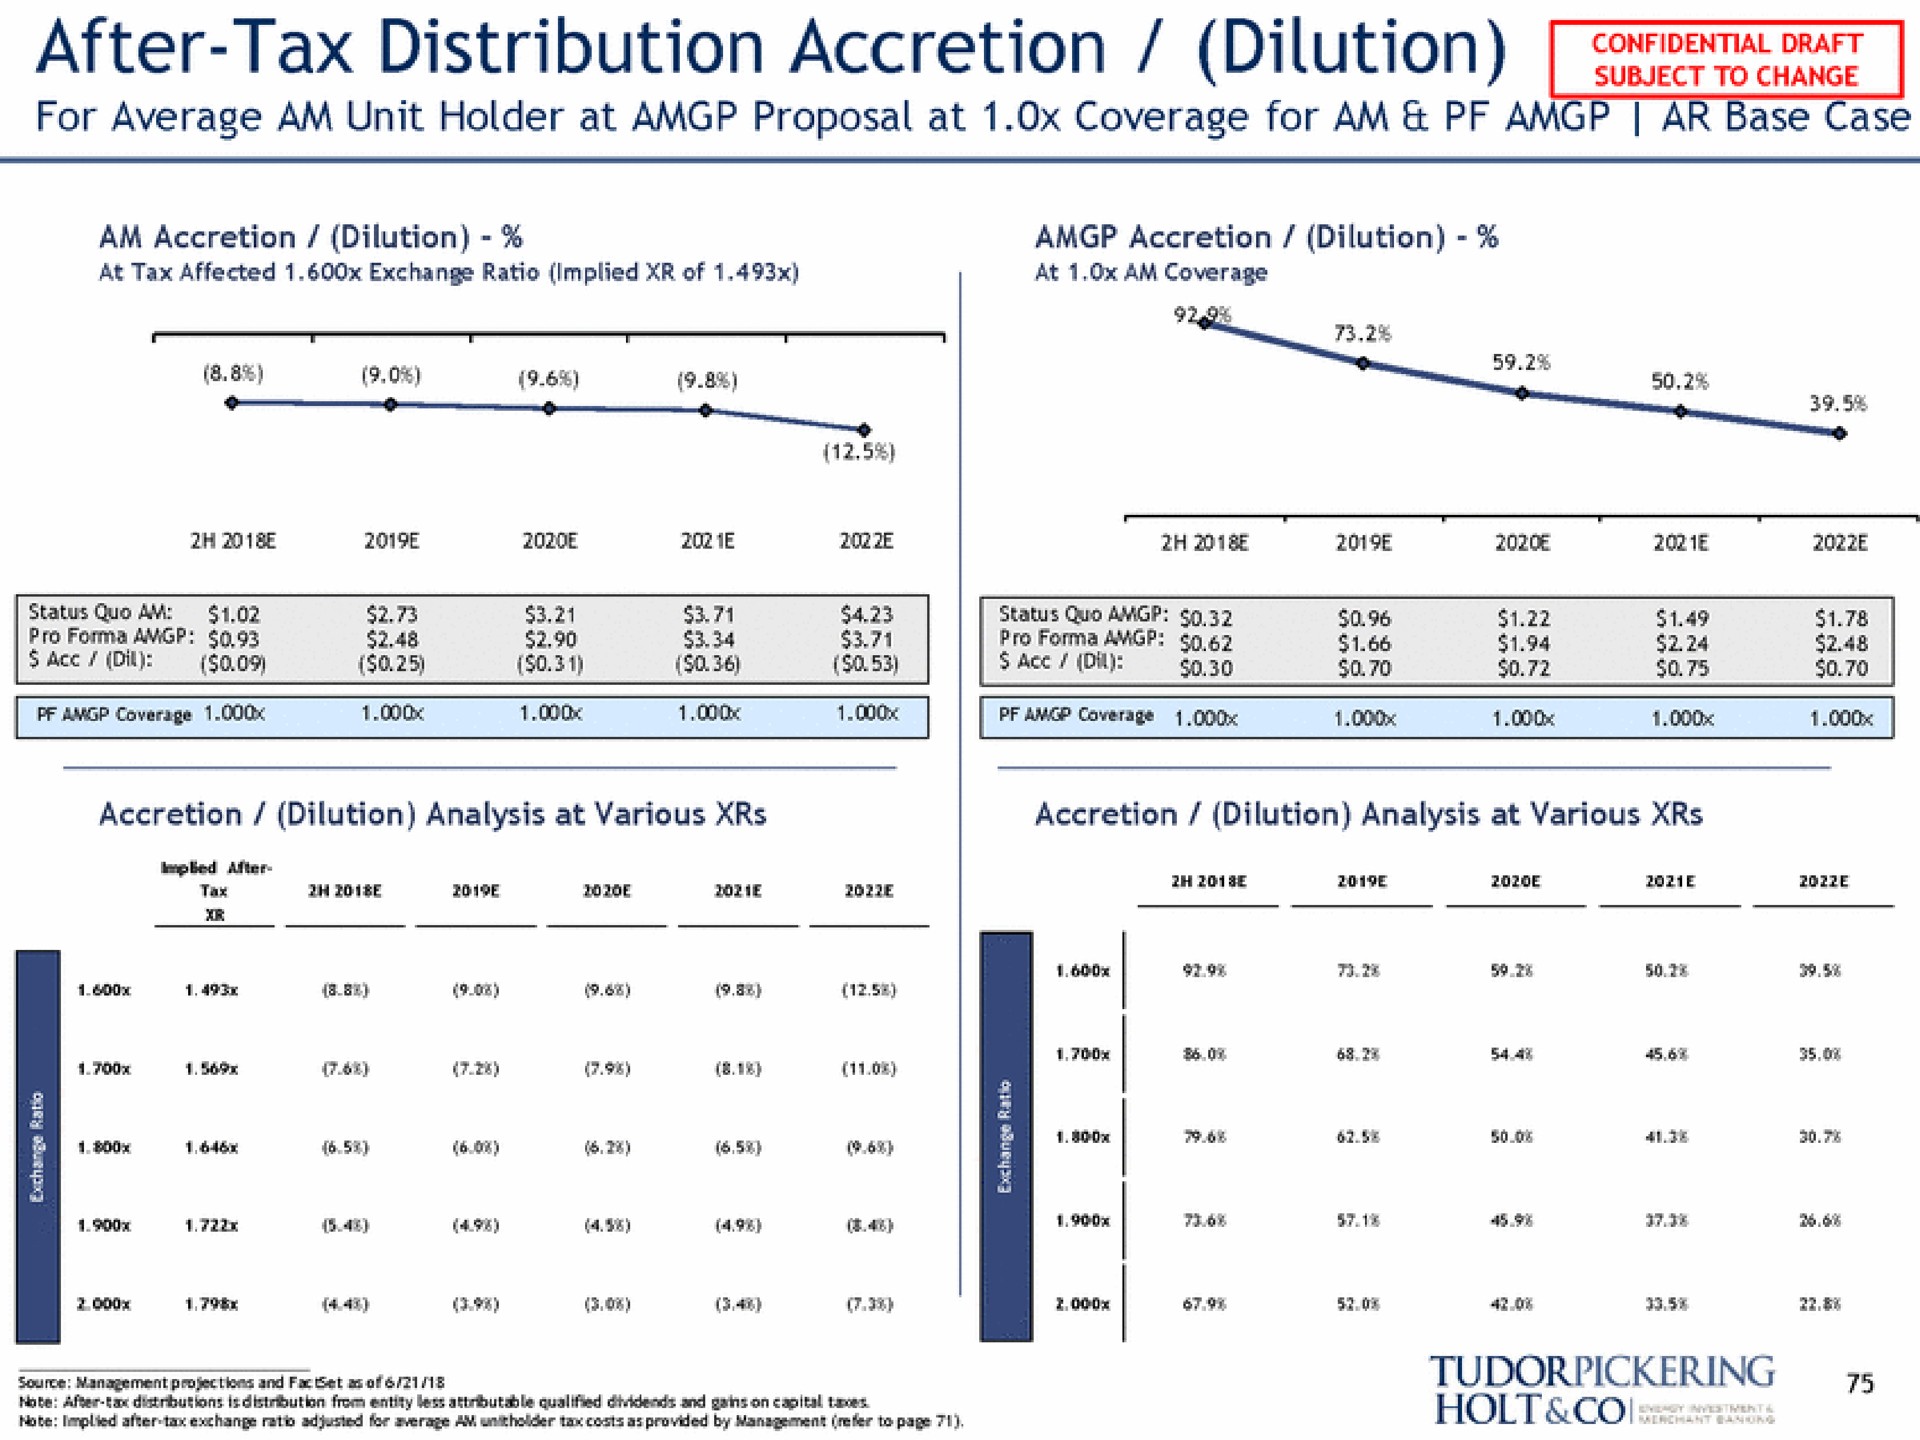 after tax distribution accretion dilution seeing holt | Tudor, Pickering, Holt & Co